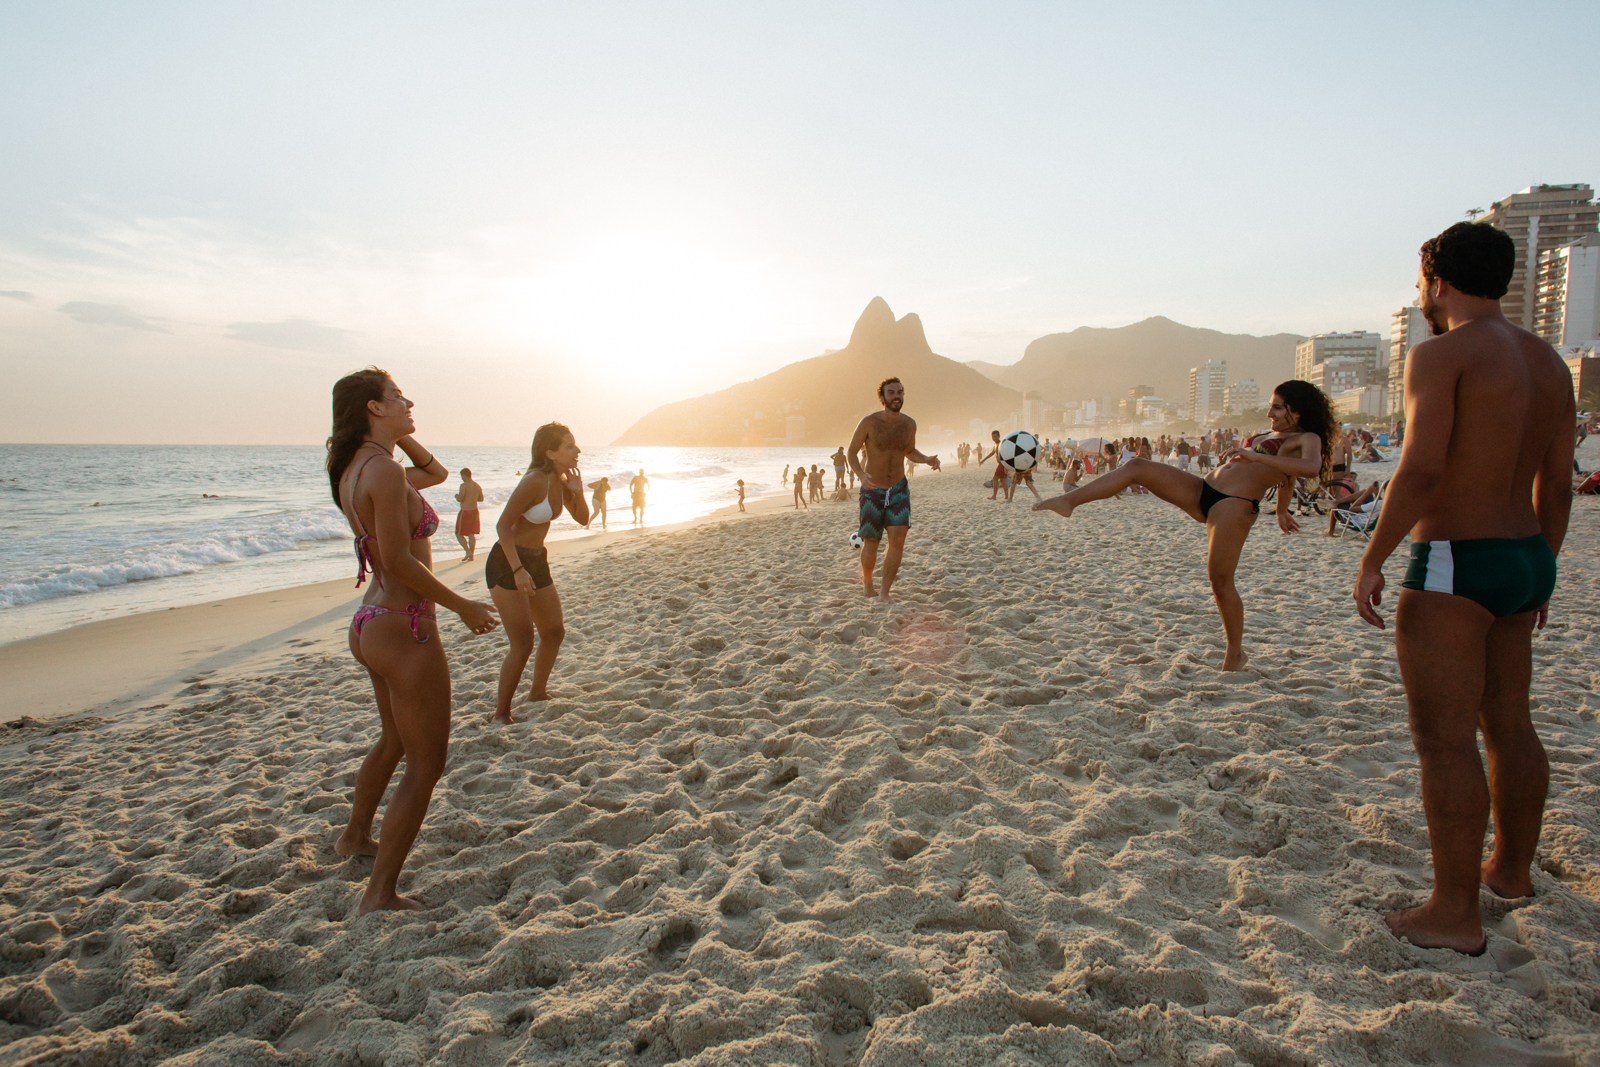 Naked girls on crowded beach The Essential Guide To Rio De Janeiro Beach Etiquette